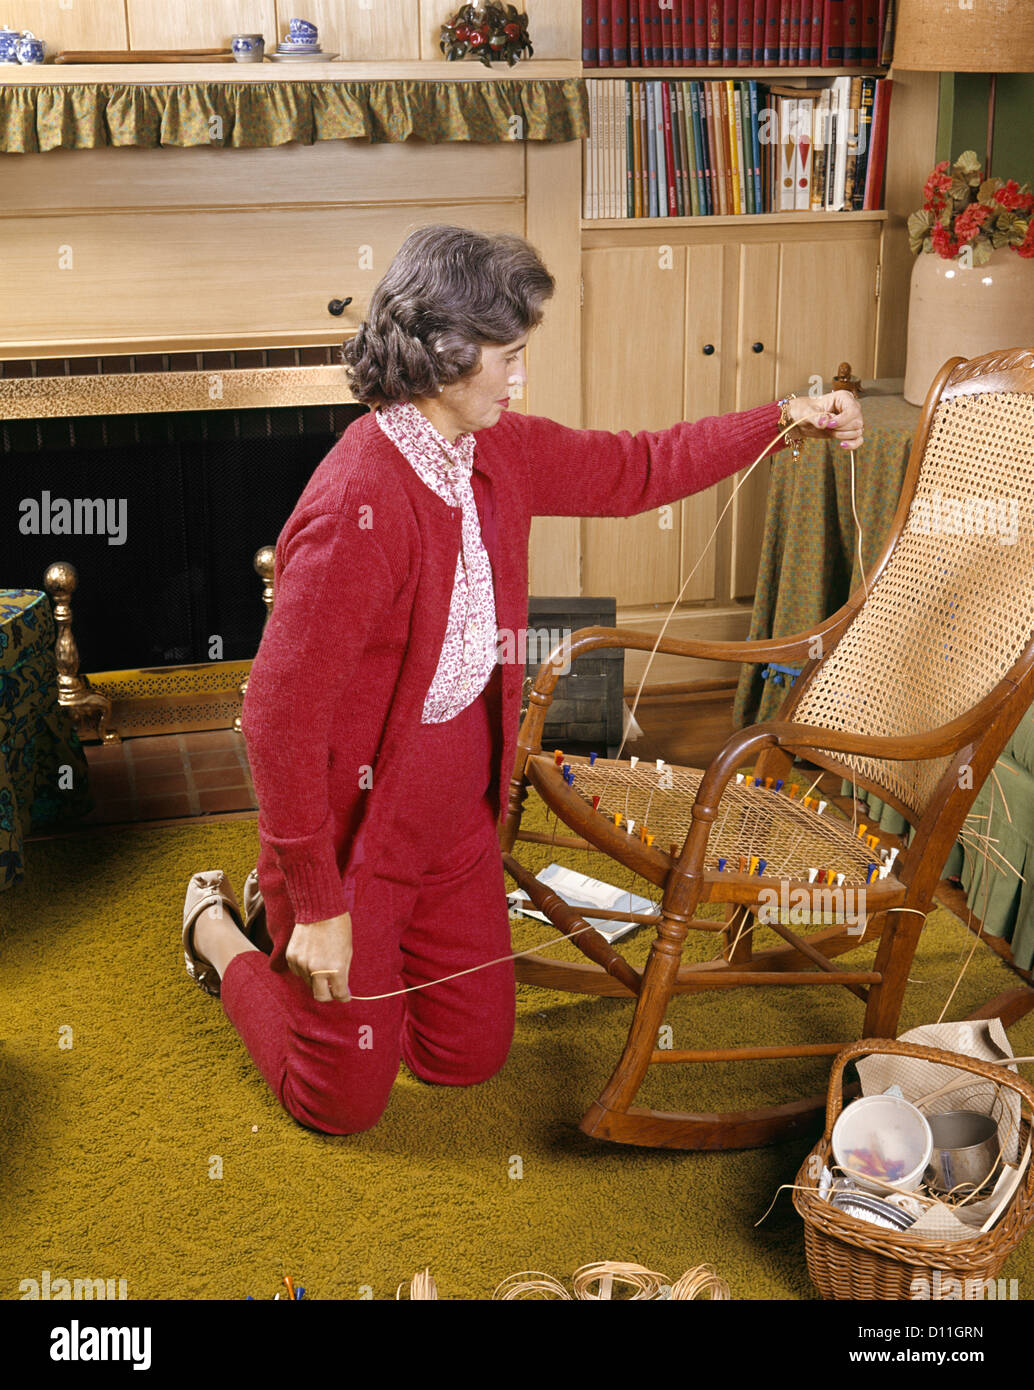 1960s MIDDLE AGED WOMAN CANING CHAIR SEAT HOBBY REPAIR ART CRAFTS HOME HOUSEHOLD Stock Photo